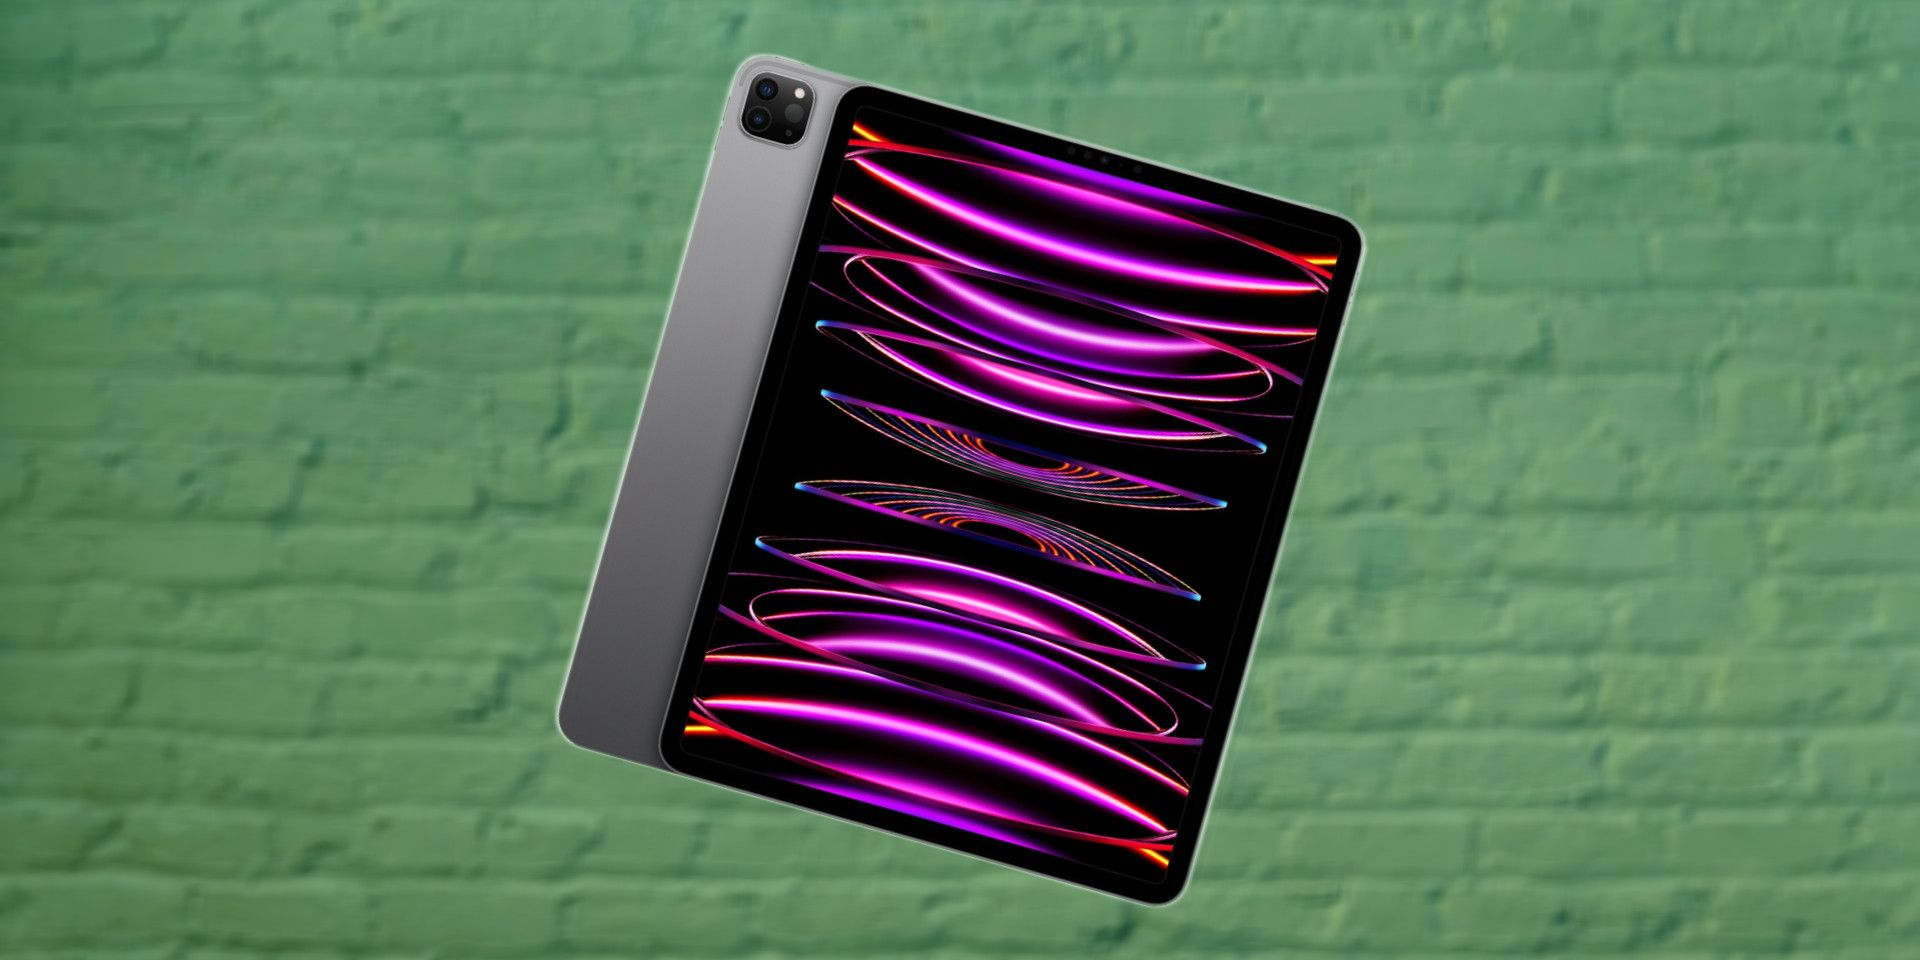 12.9-inch M2 iPad Pro (2022) with pink and black radial design on blurred green brick background